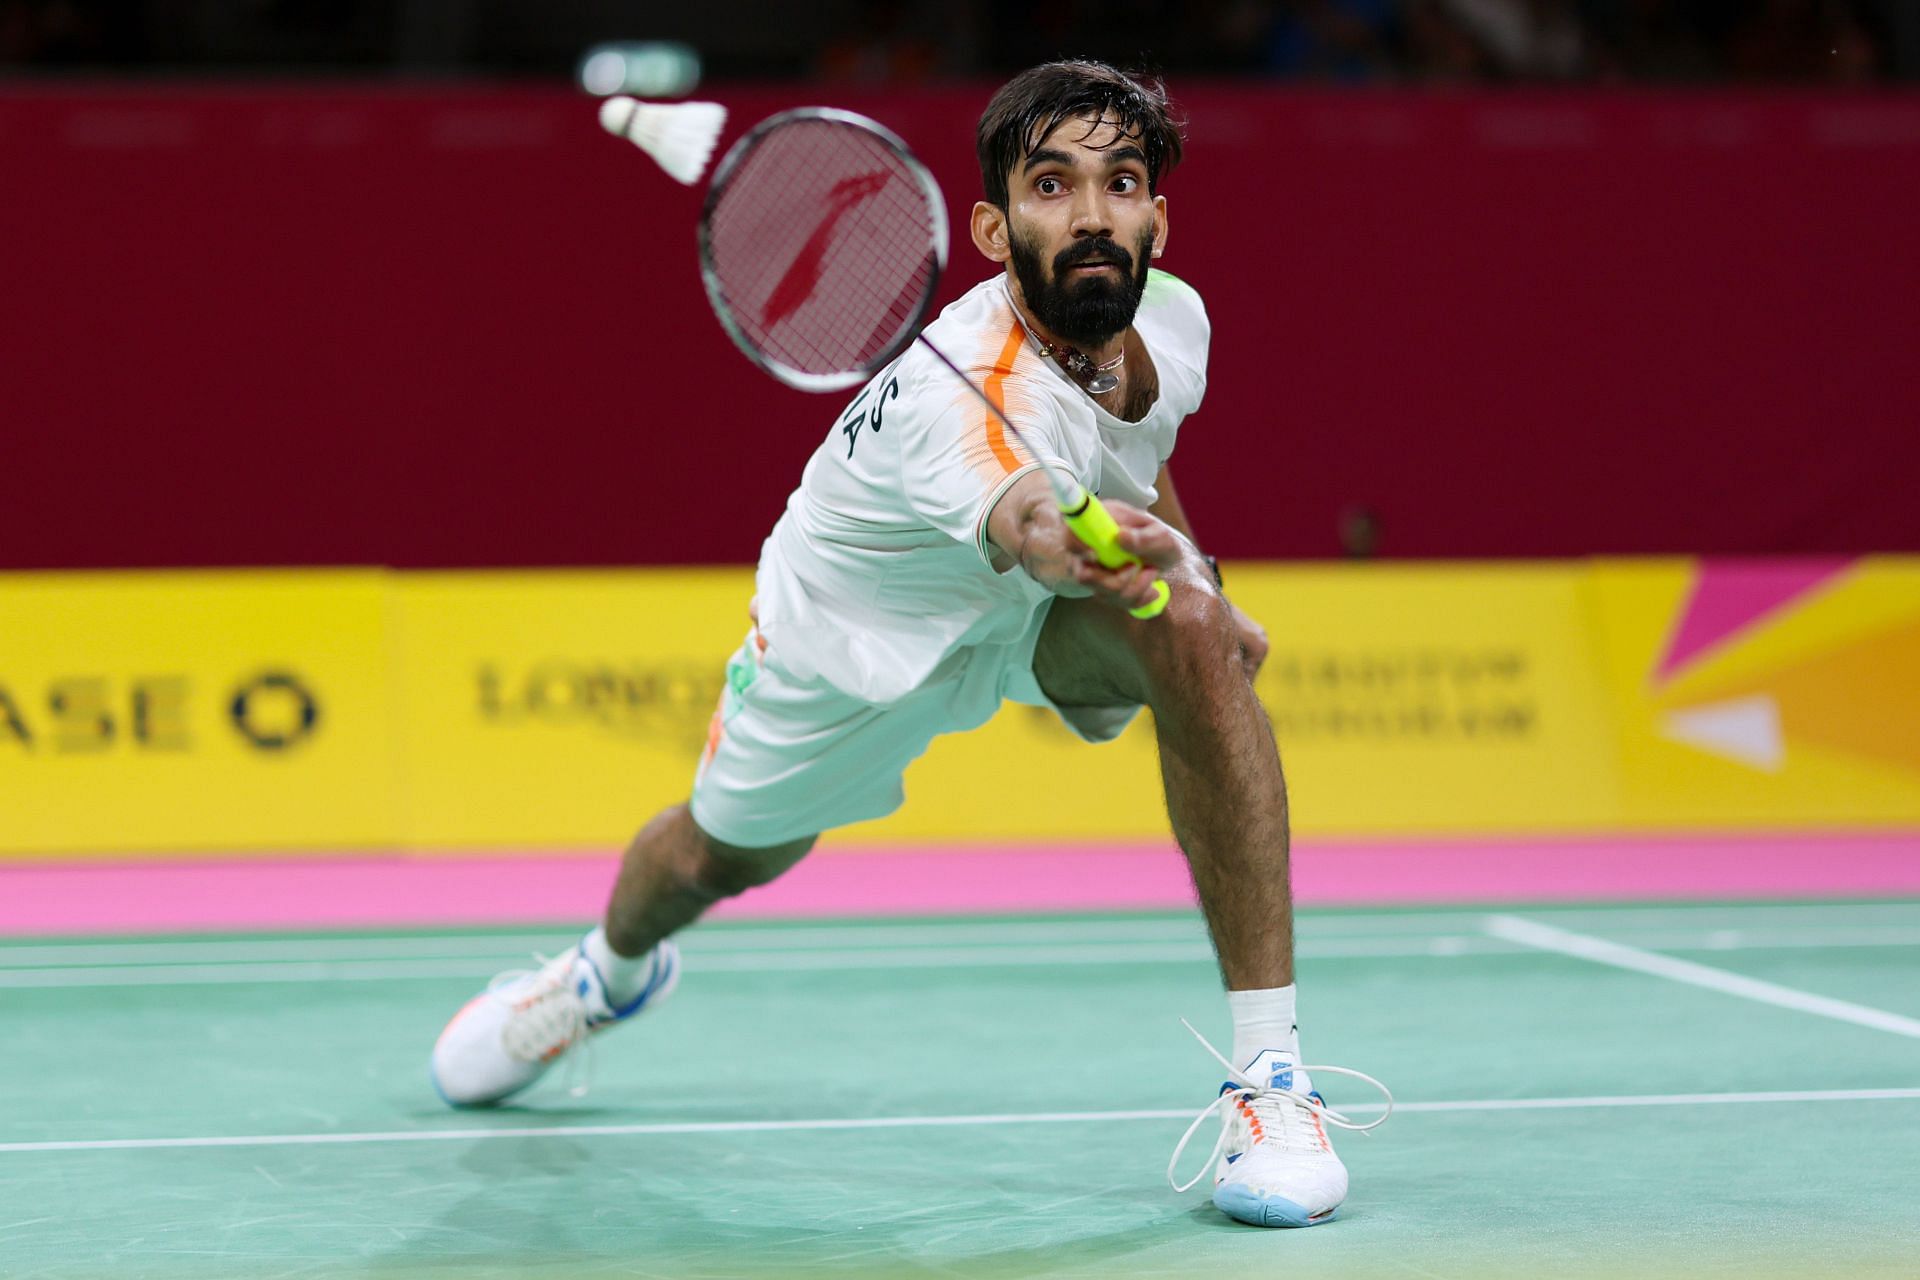 Hylo Open 2022 Kidambi Srikanth vs Lu Guang Zu preview, head-to-head, prediction and live streaming details